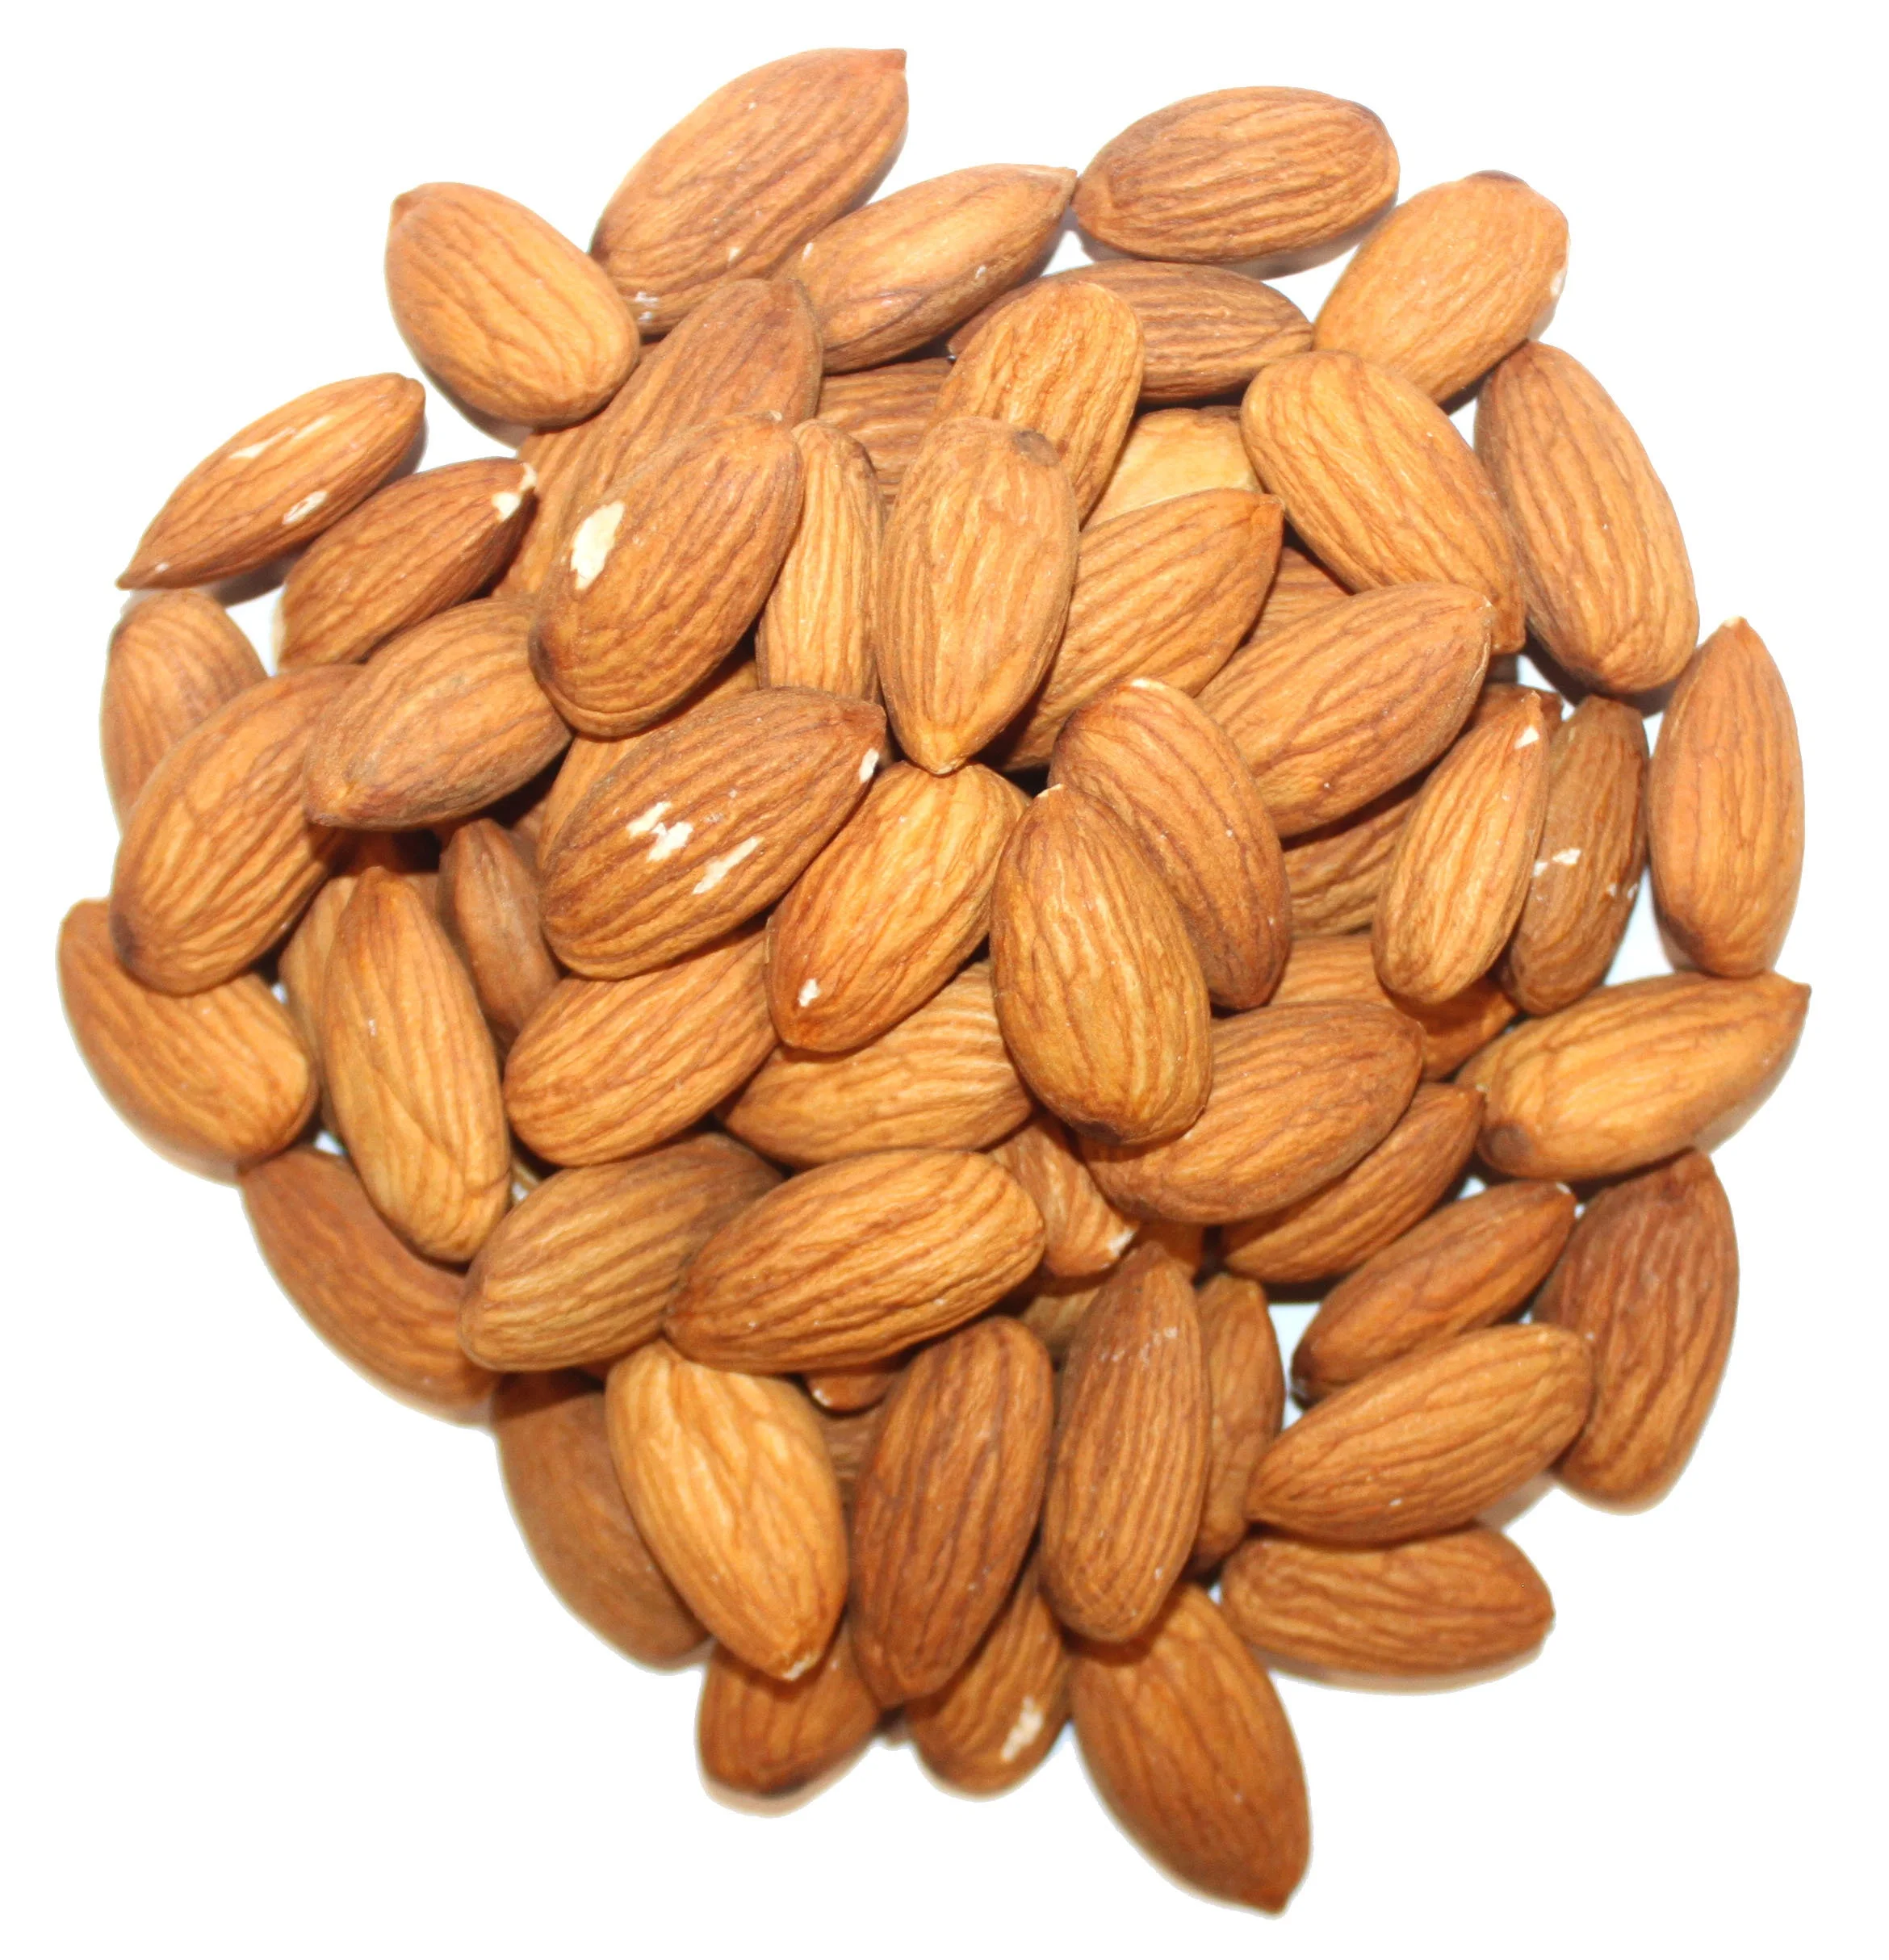 Buy Almonds - Almond Nuts - Raw Bitter and Sweet Kernels - Ships in Bulk a Grade Dried Organic Cultivation